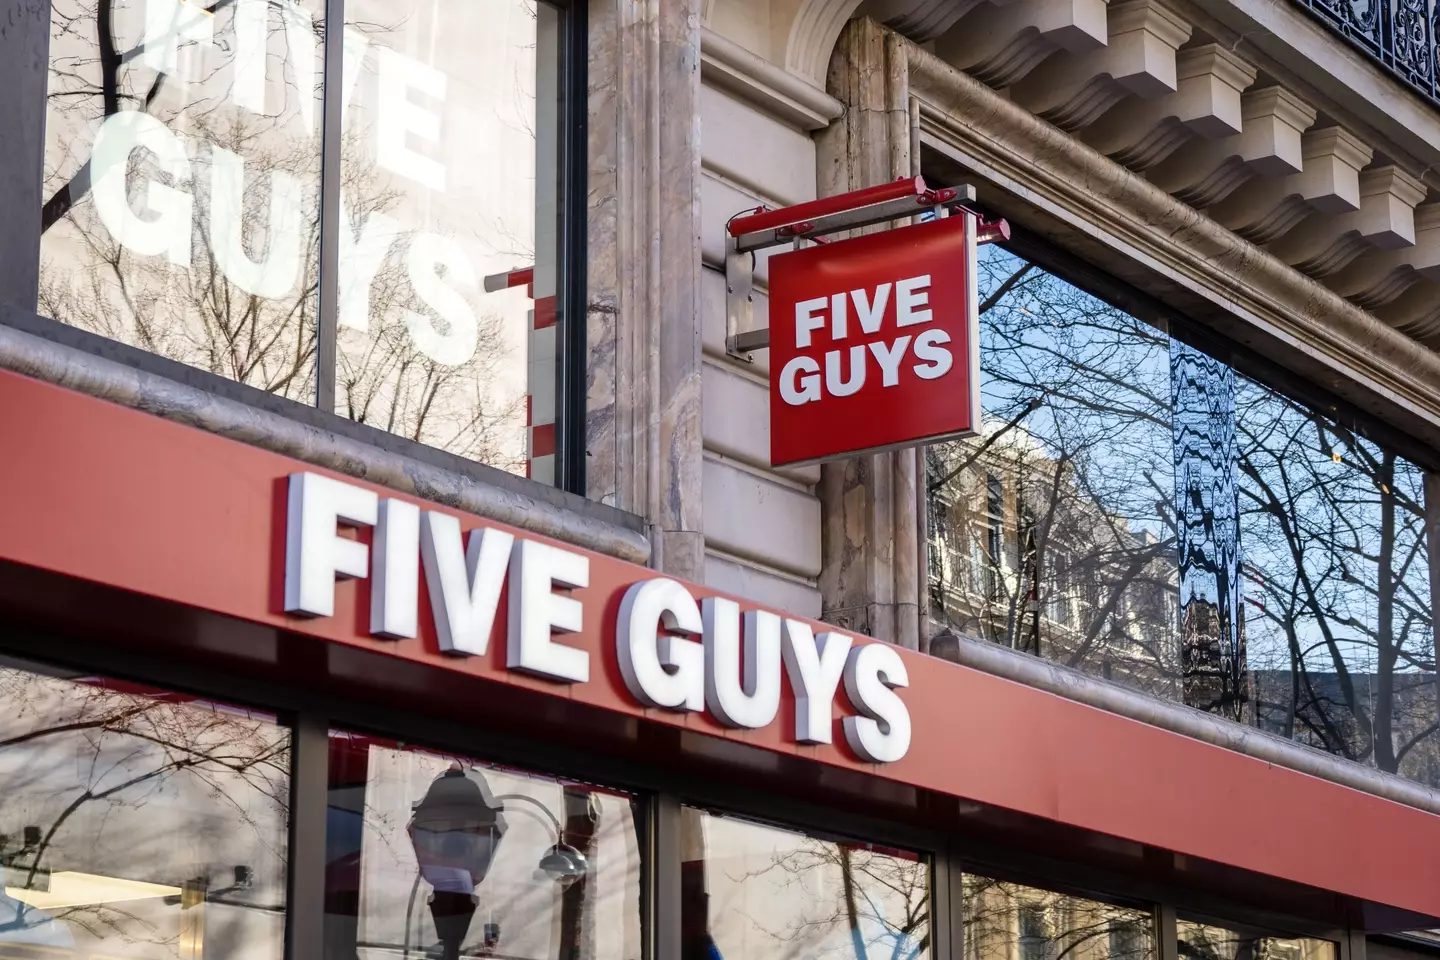 An explanation for the prices at Five Guys has been provided.